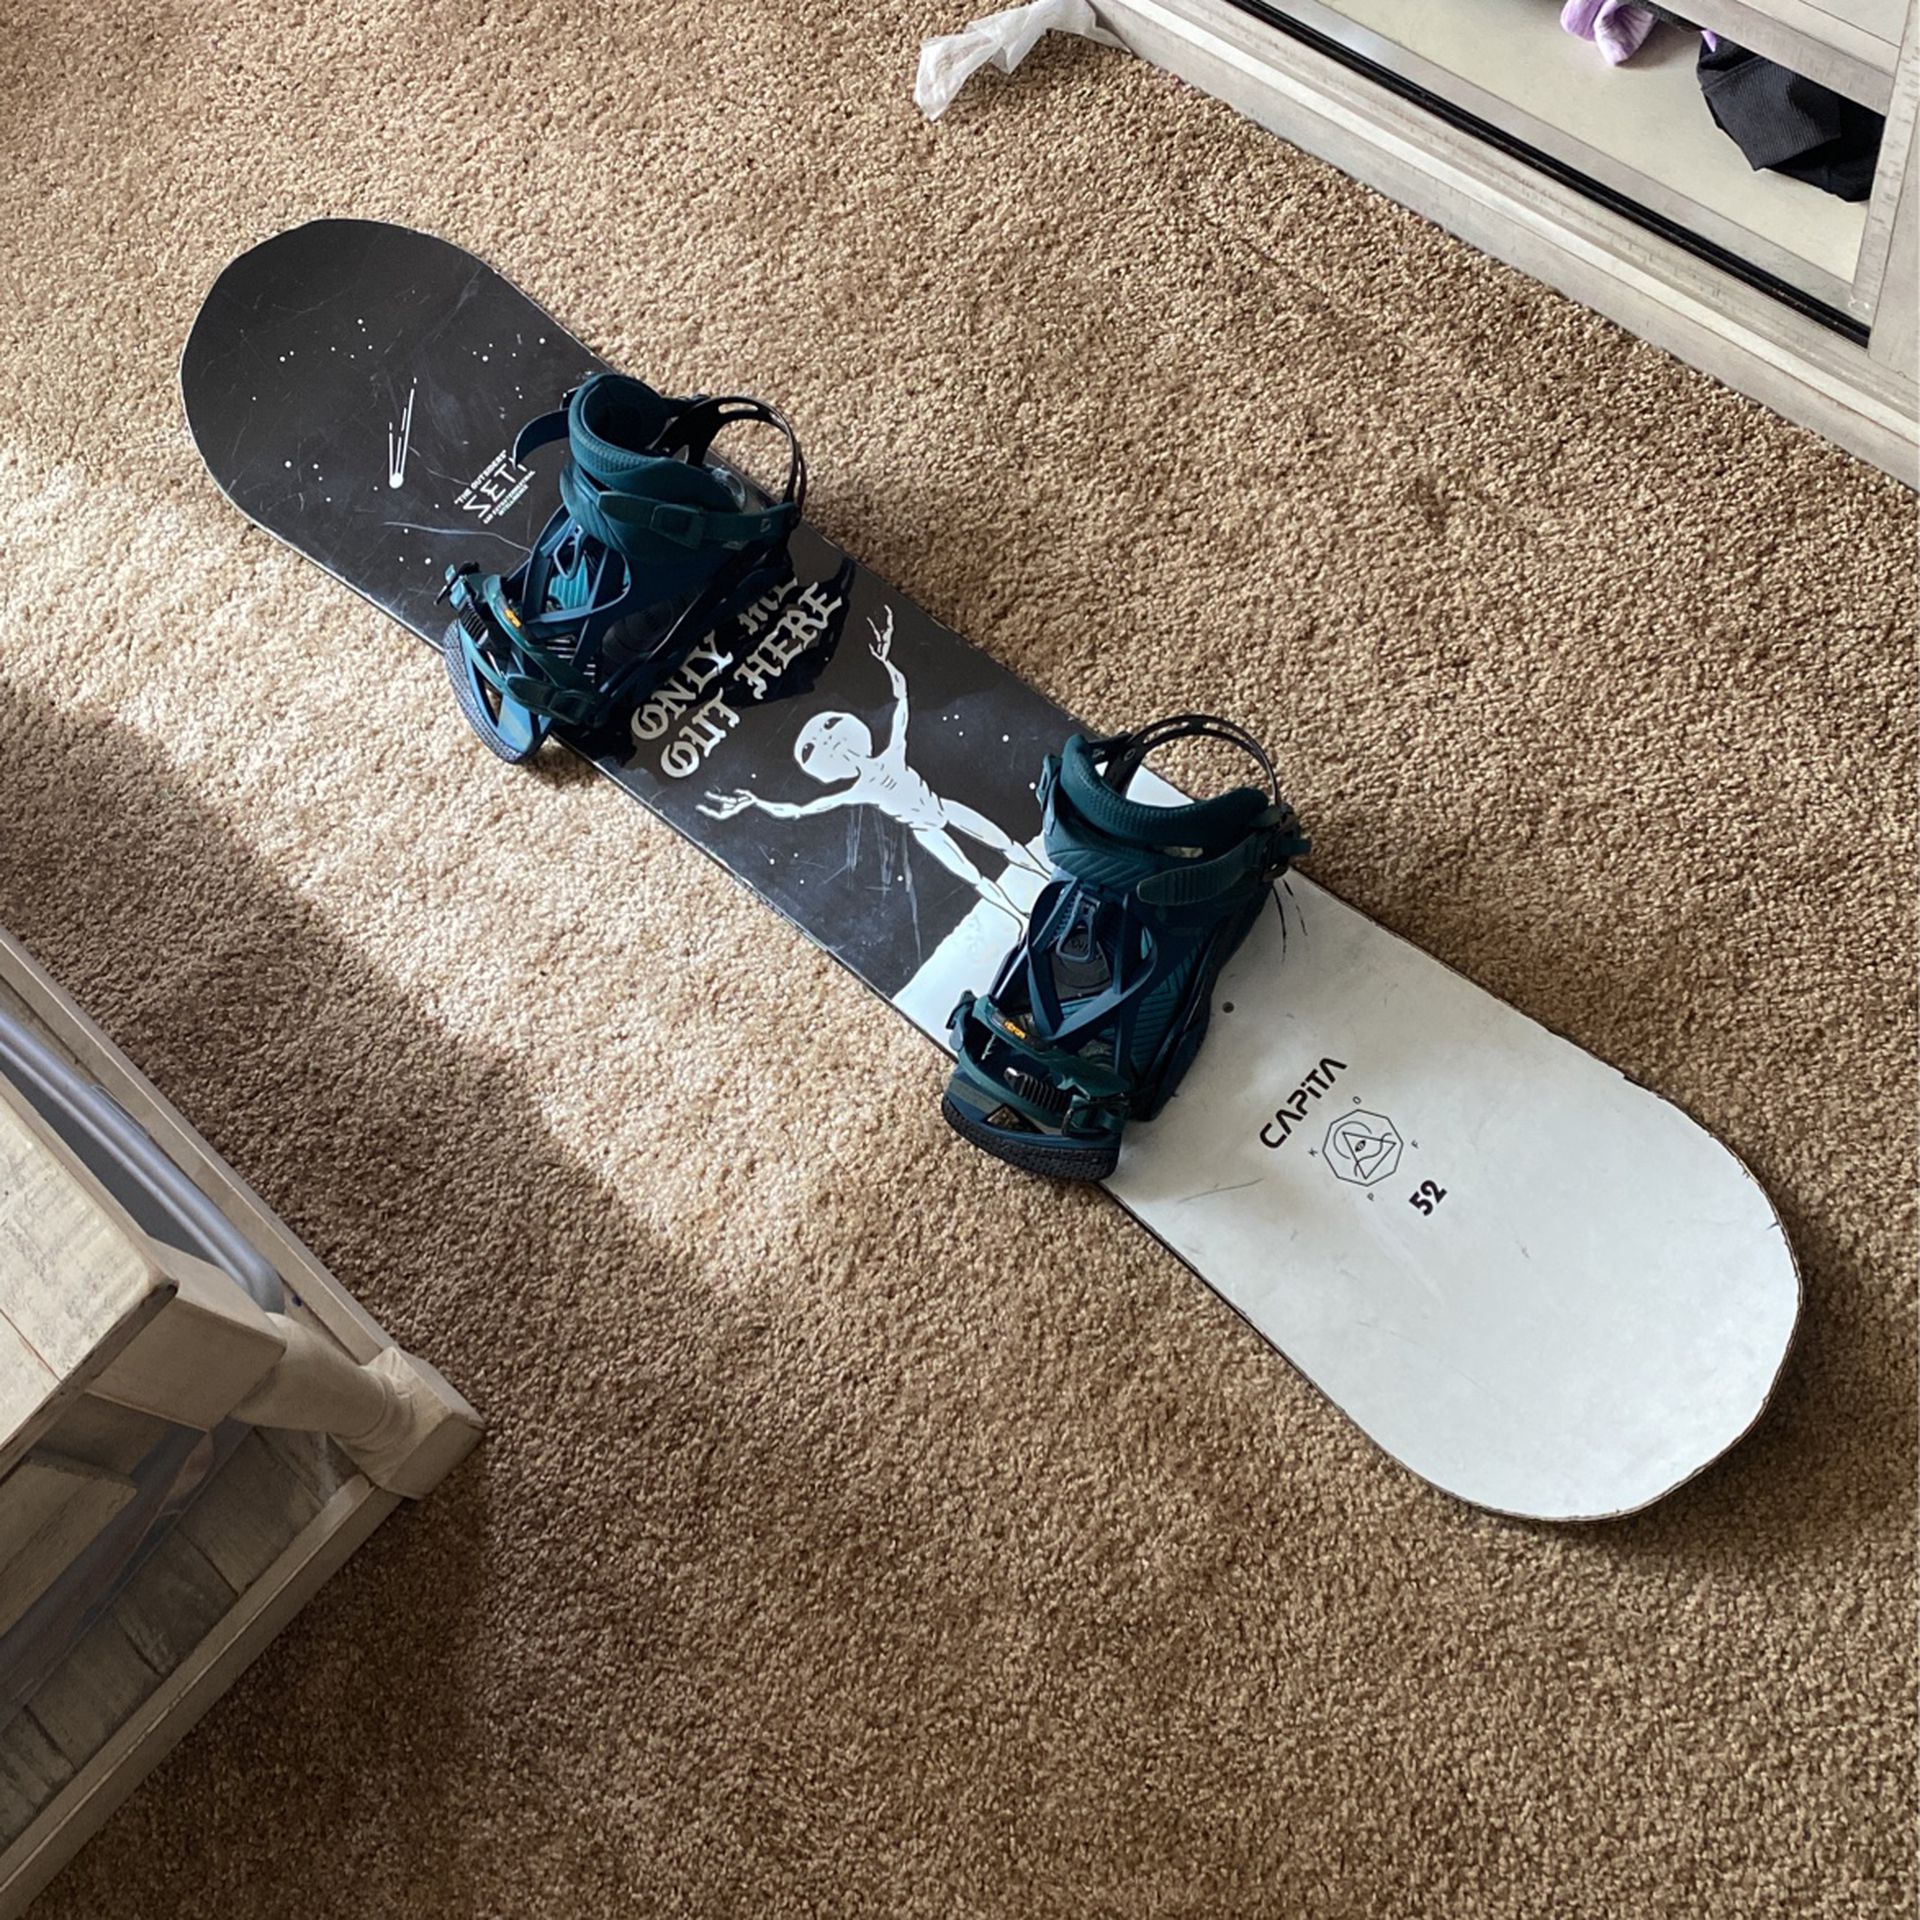 Capita Outsiders 152 Cm With Nitro Bindings for in Las Vegas, NV - OfferUp